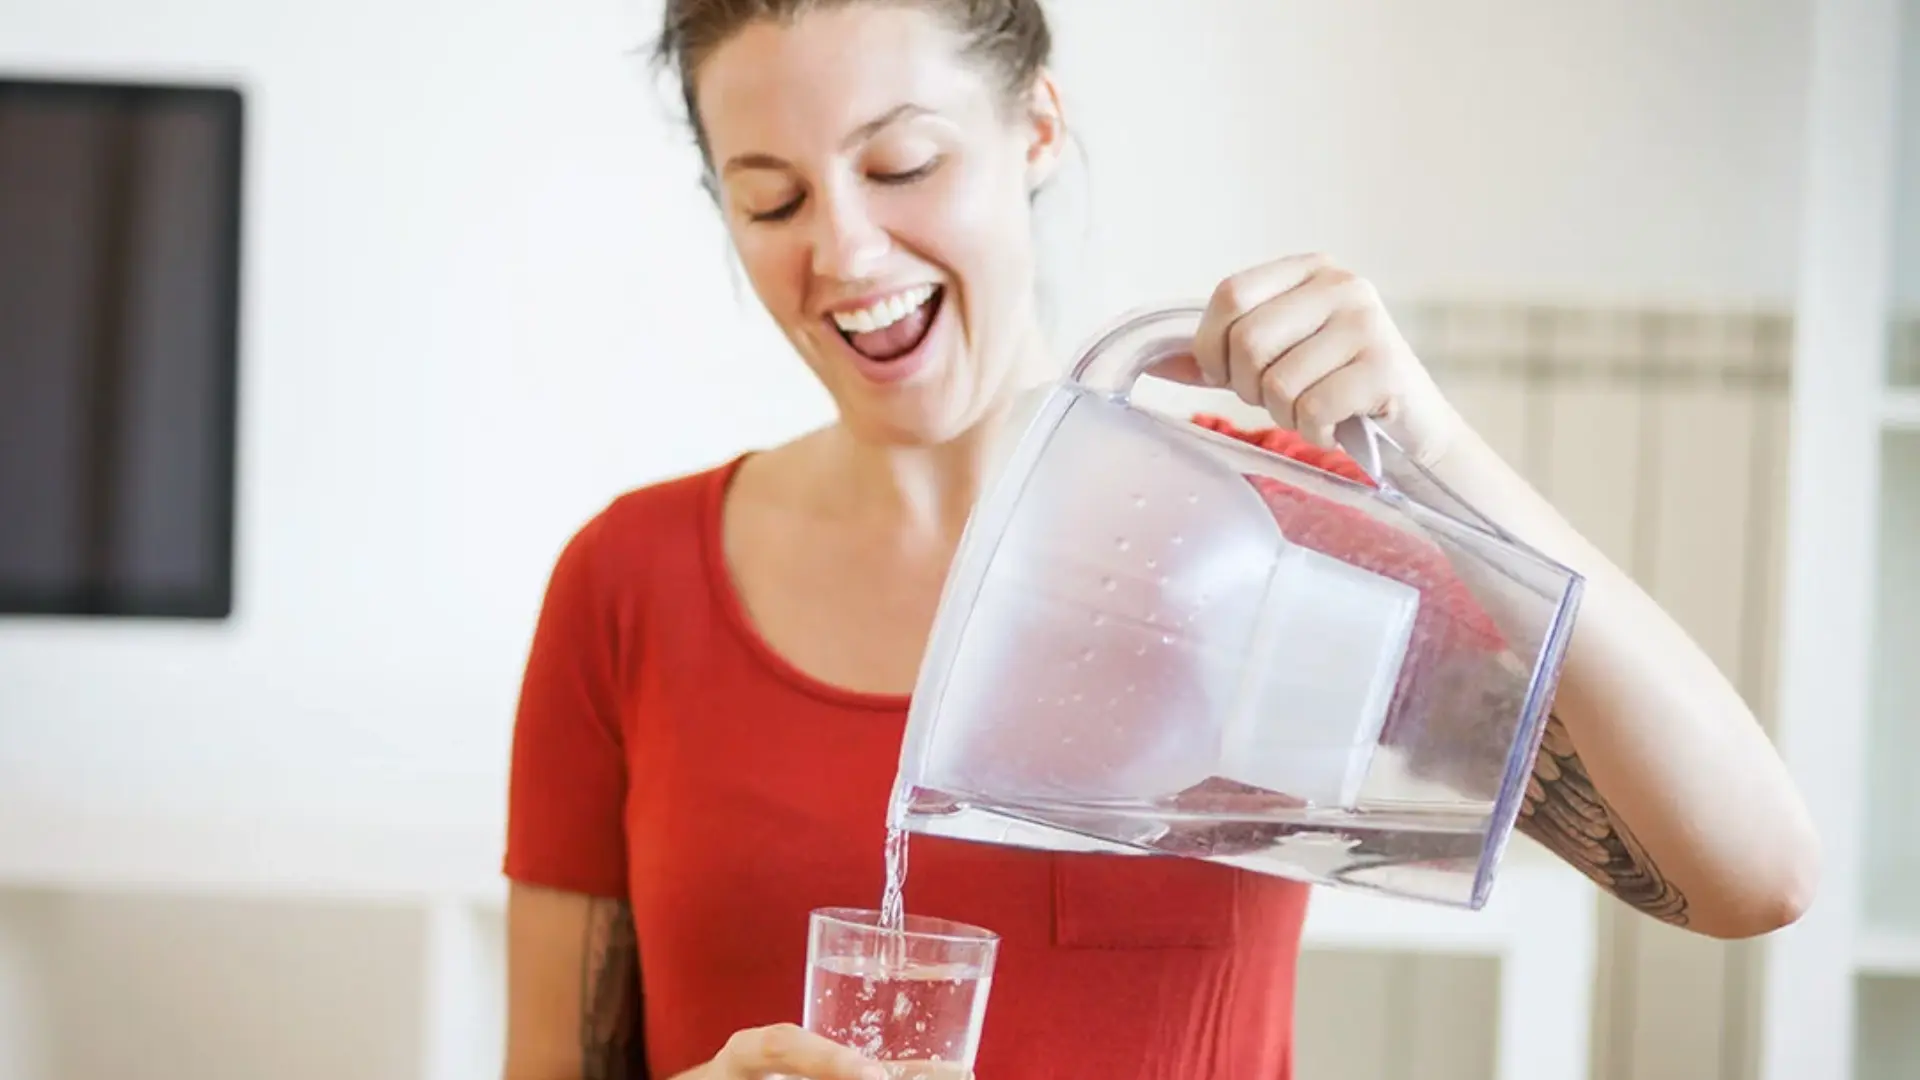 Water Filter and Health Benefits